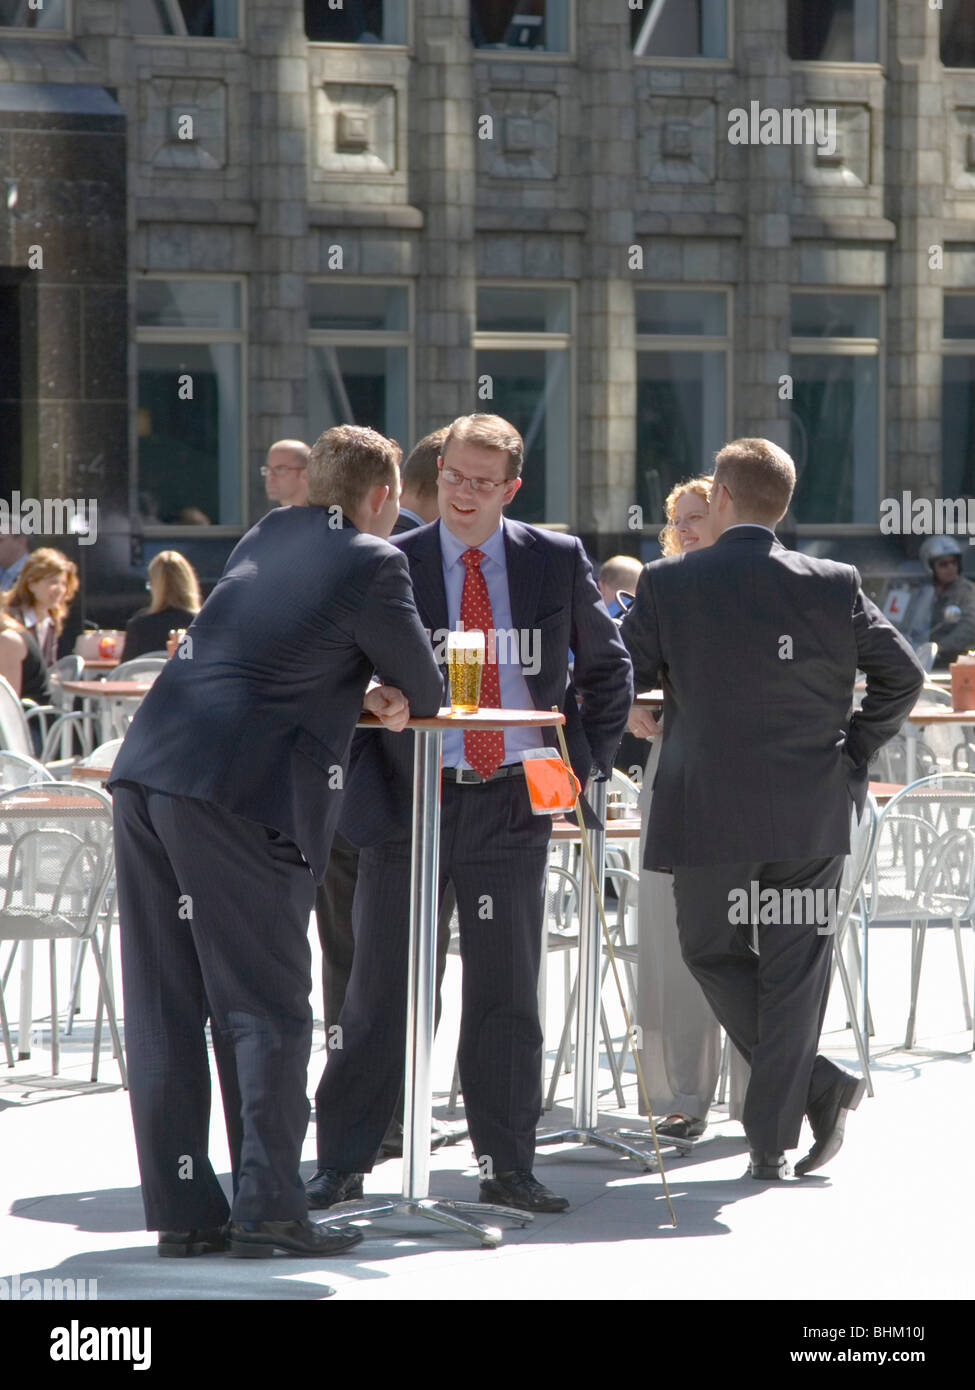 London, Greater London, England. City workers enjoying a drink at the foot of the Swiss Re Tower, also known as the Gherkin. Stock Photo